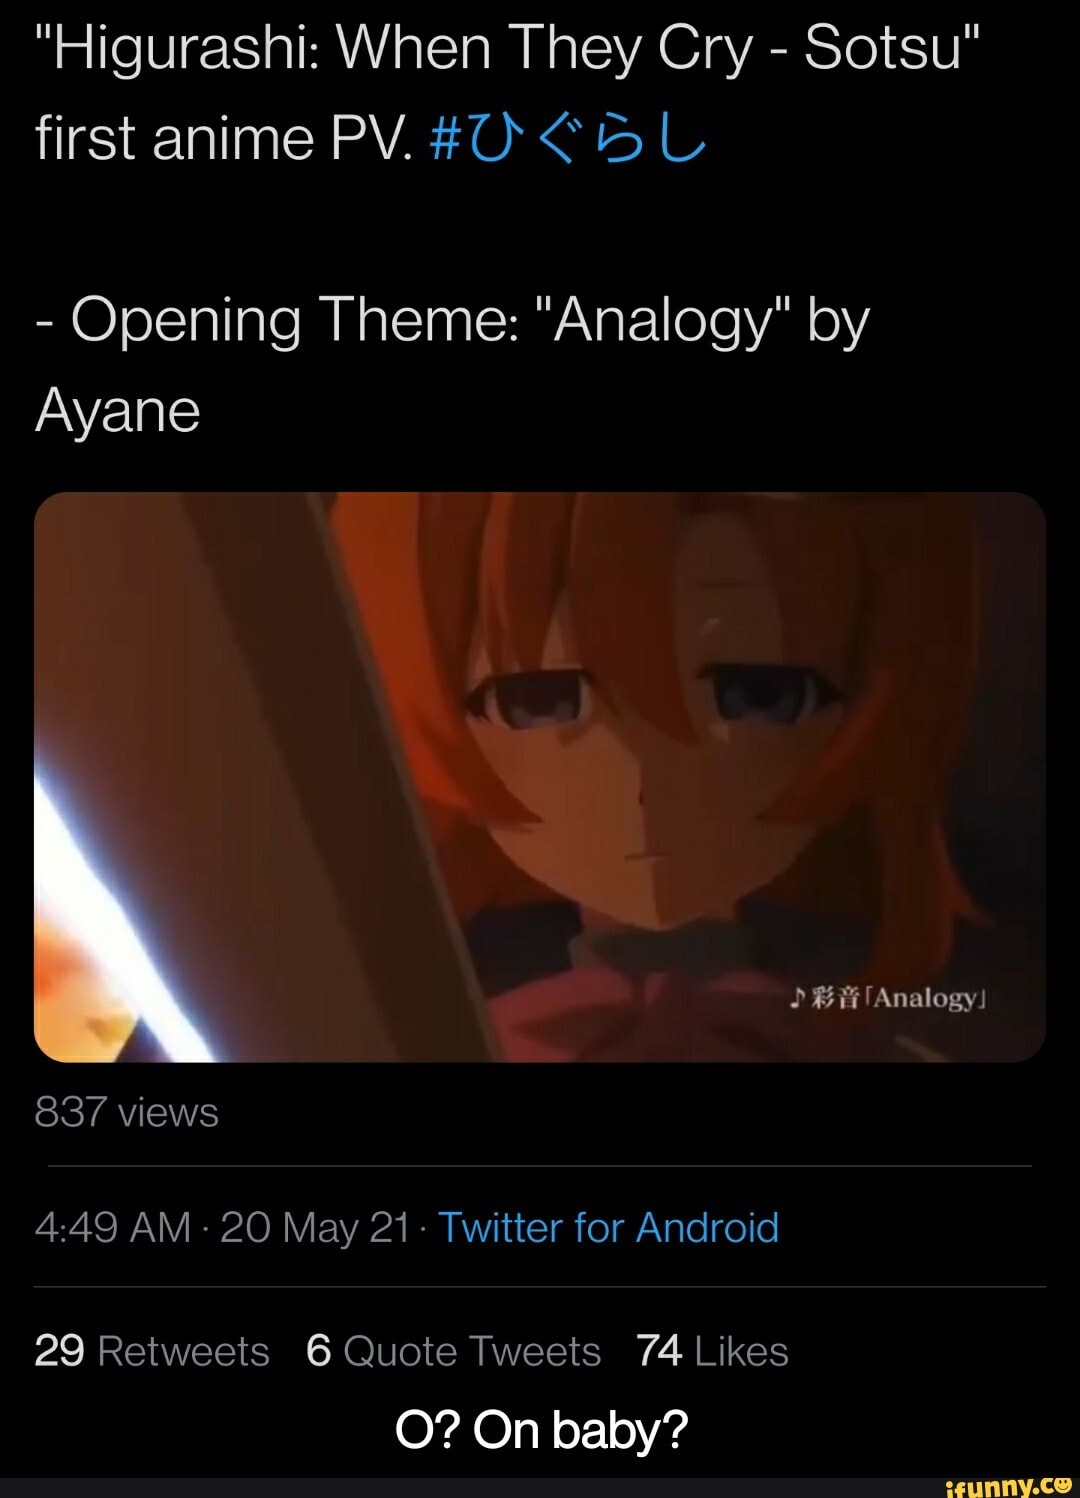 Higurashi When They Cry Sotsu First Anime Pv Ll Opening Theme Analogy By Ayane Lanalogy 7 Views q Am May 21 Twitter For Android O On Baby O On Baby